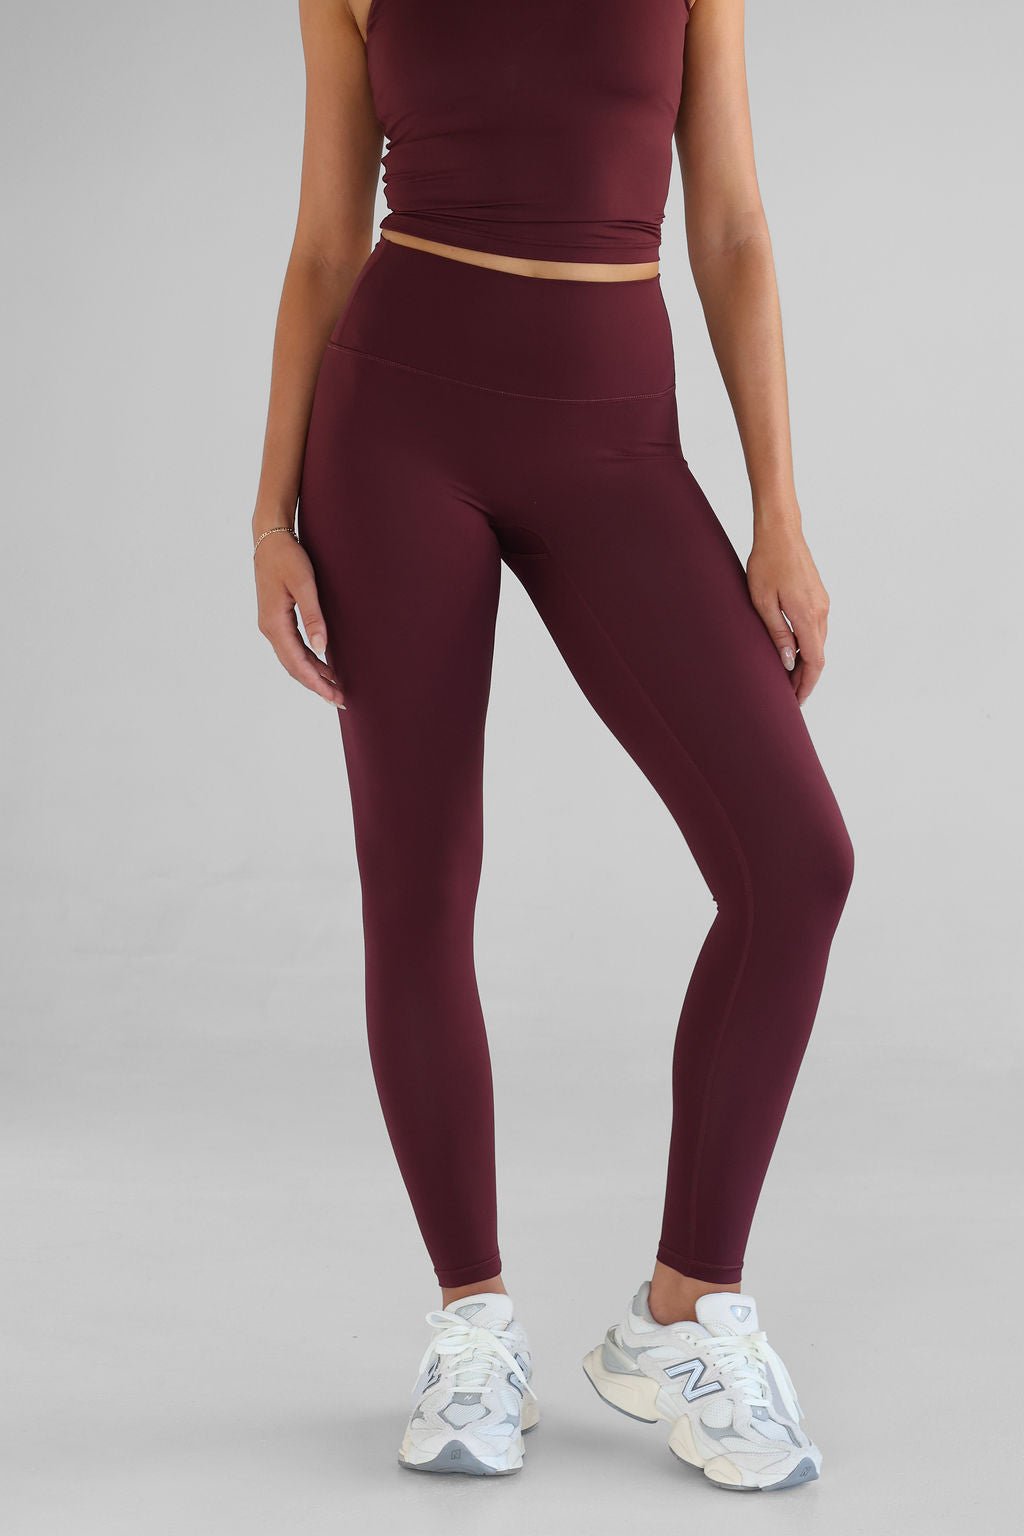 SCULPT Full Length Leggings - Cherry Cola SHIPPING FROM 12/02 - LEELO ACTIVE